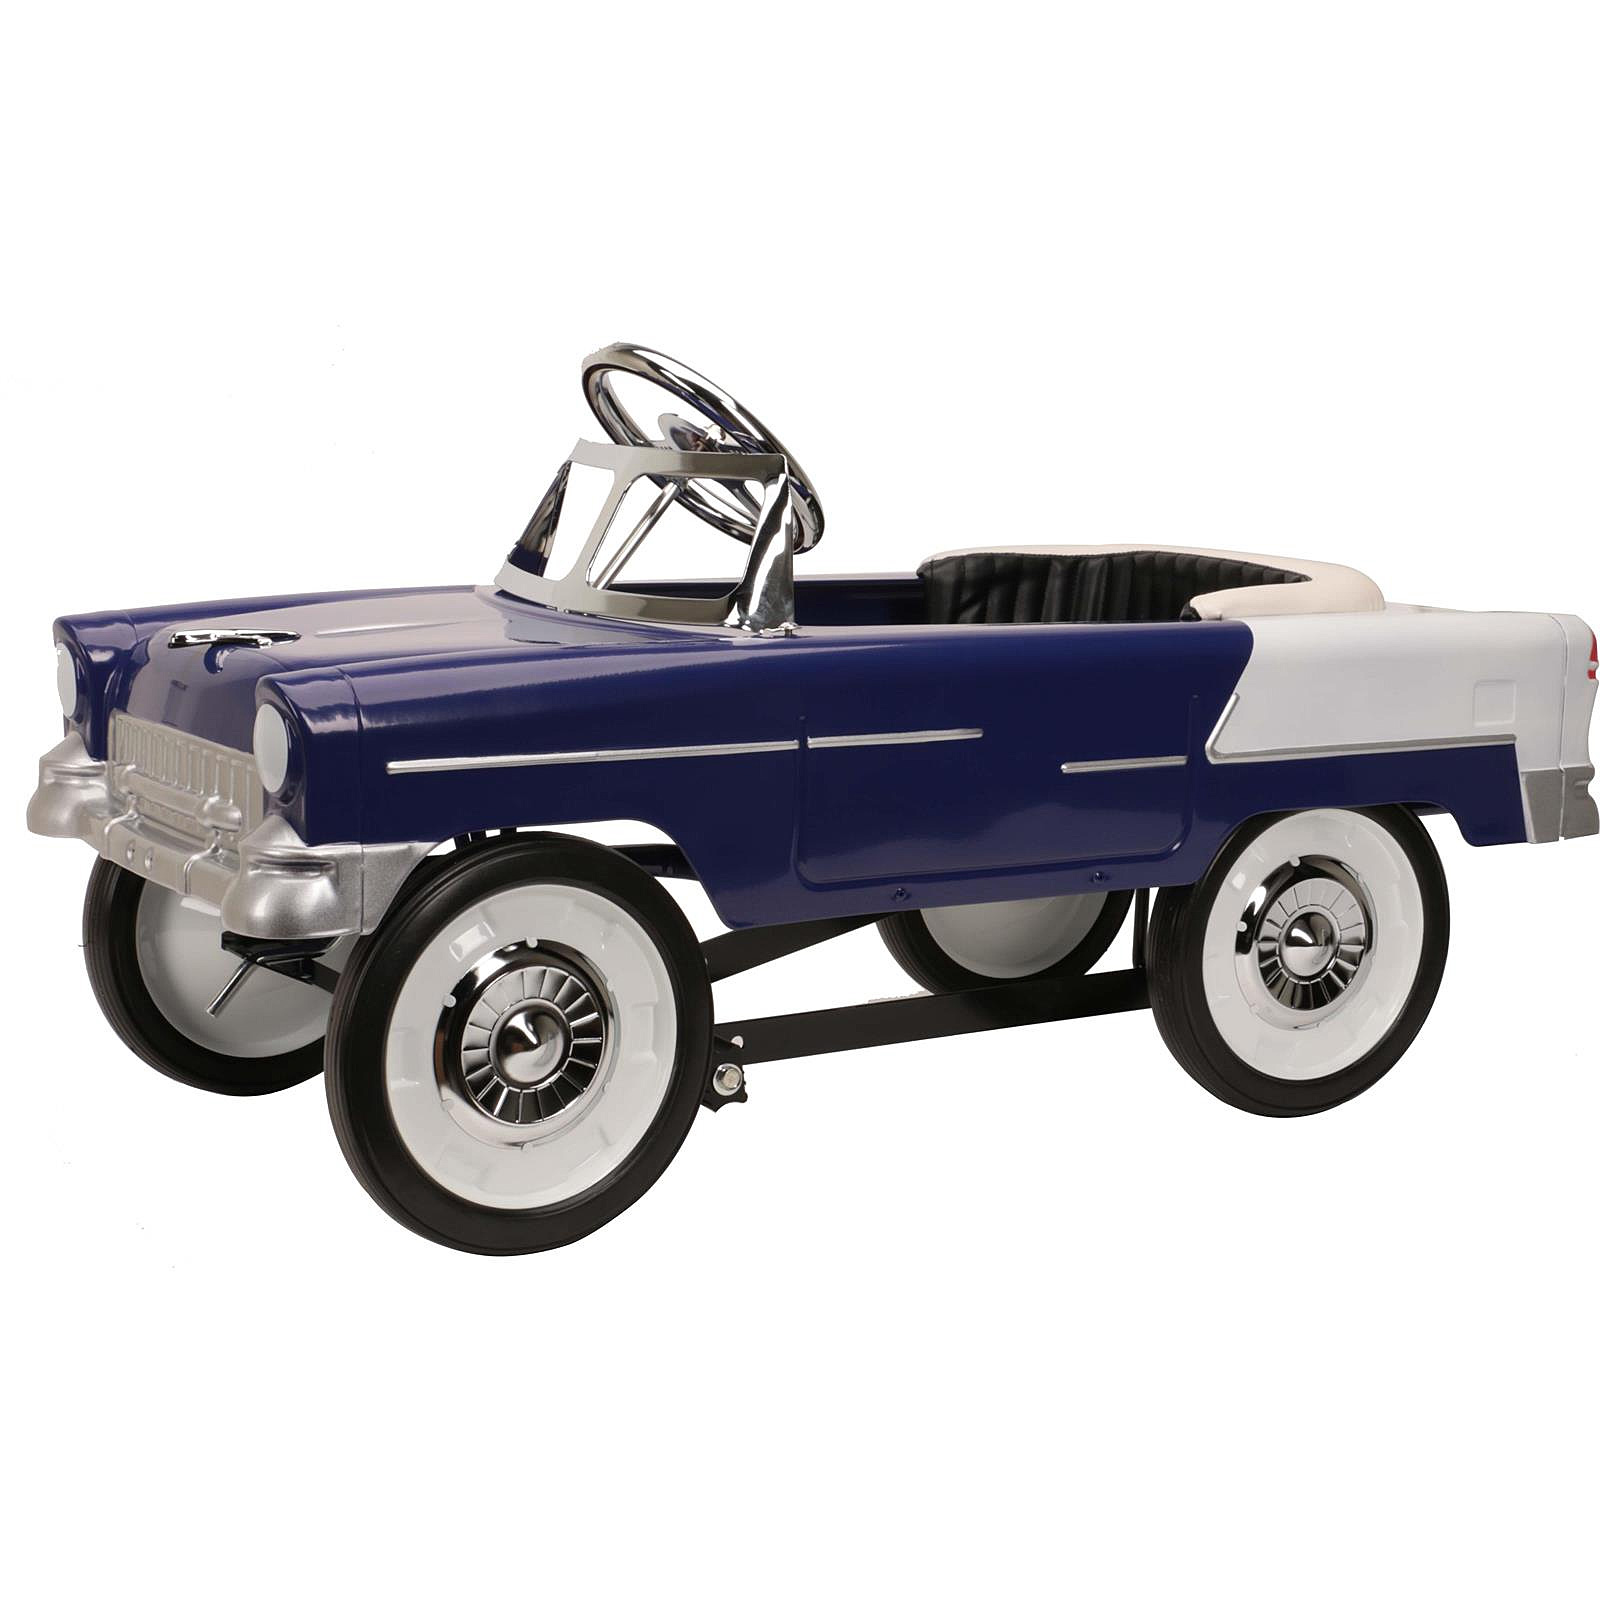 1955 Chevy Pedal Car - Purple / White - image 1 of 3